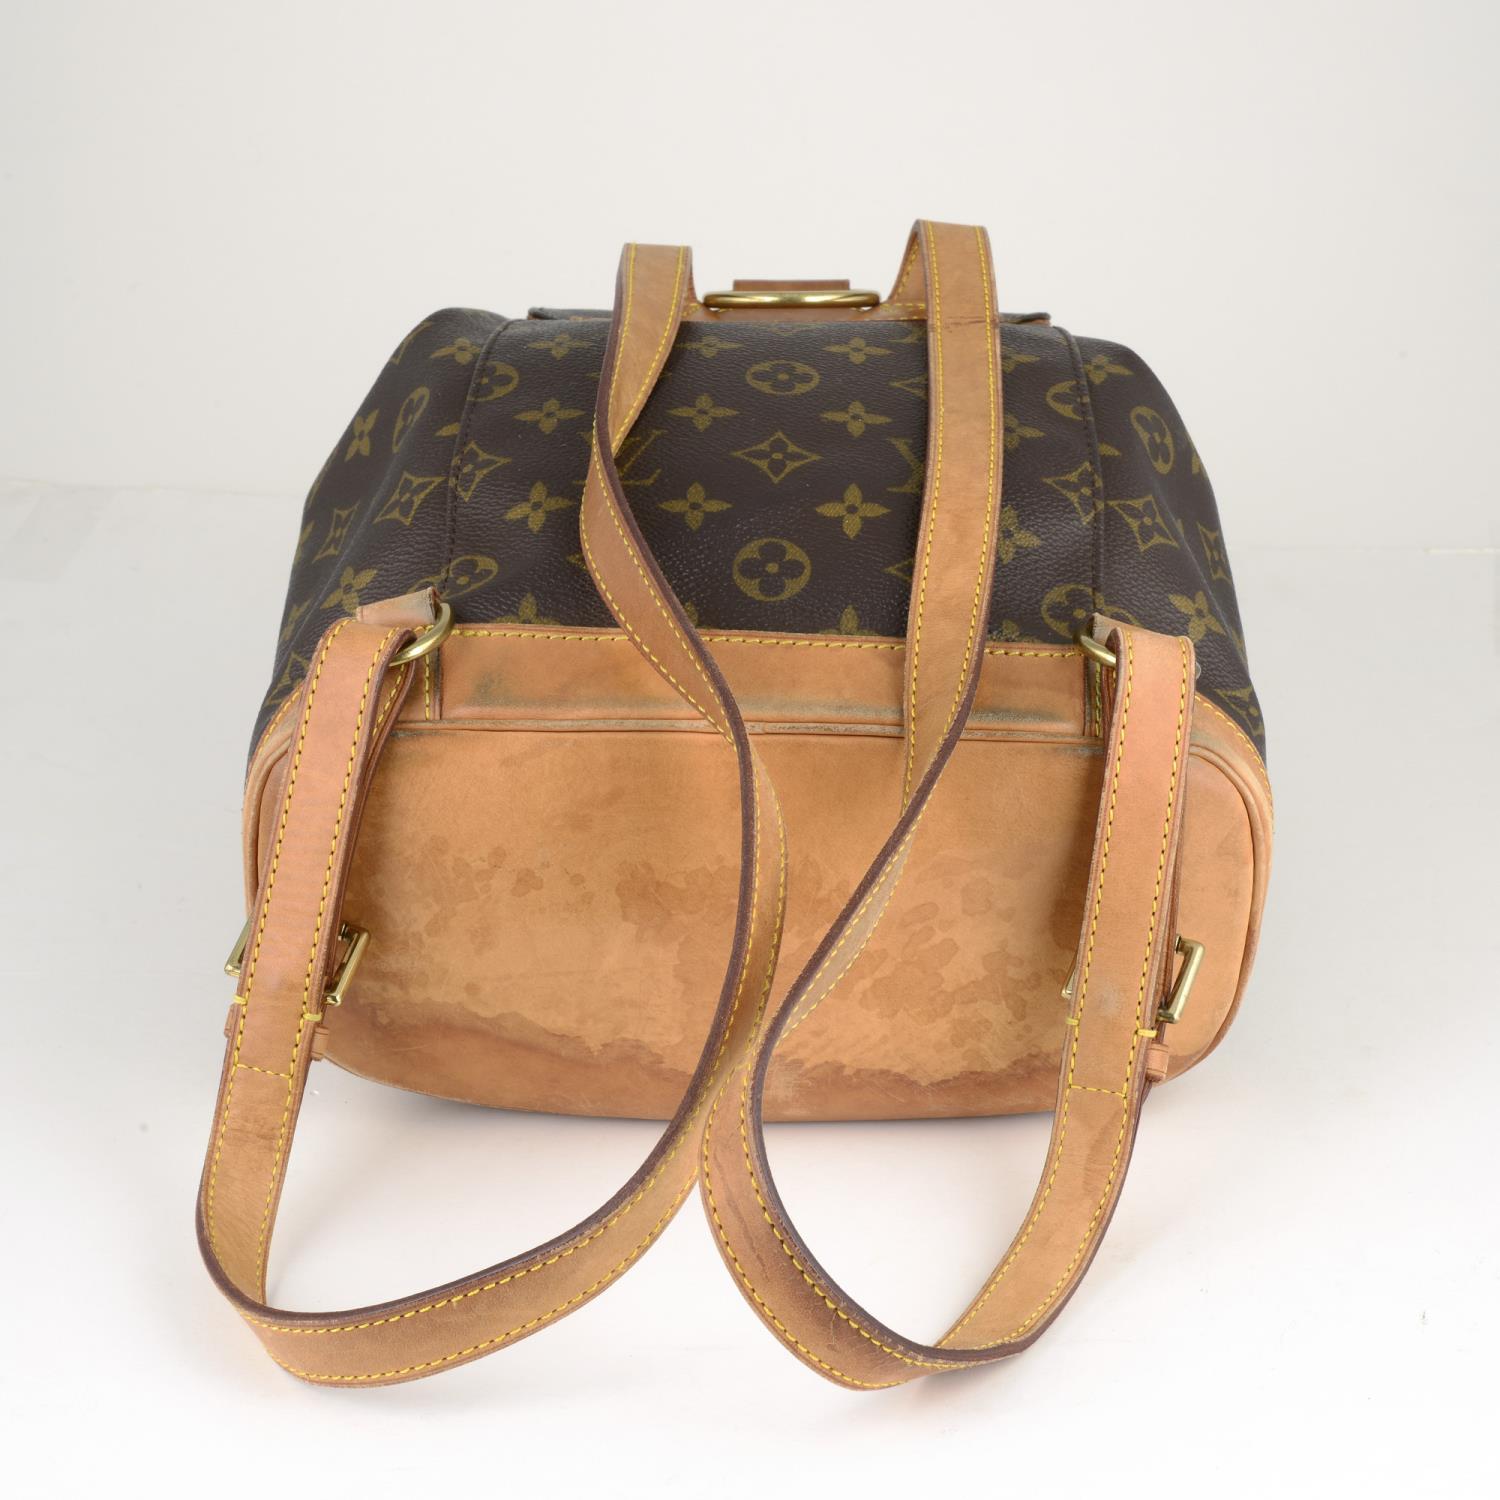 LOUIS VUITTON - a Monogram Montsouris MM backpack. - Image 5 of 6